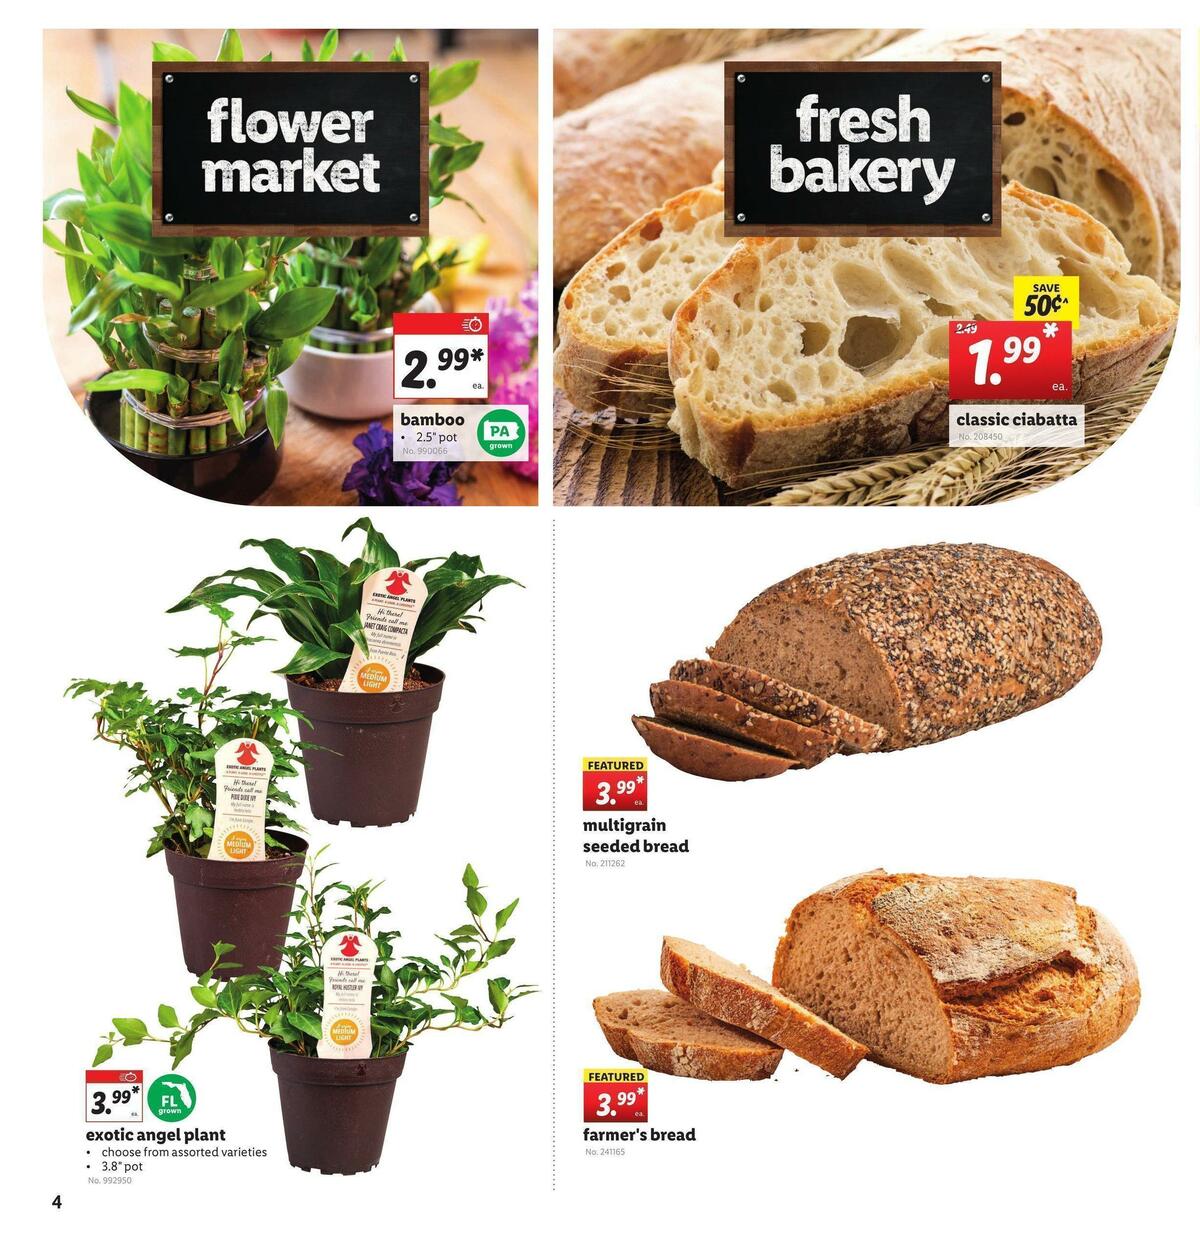 LIDL Weekly Ad from June 23